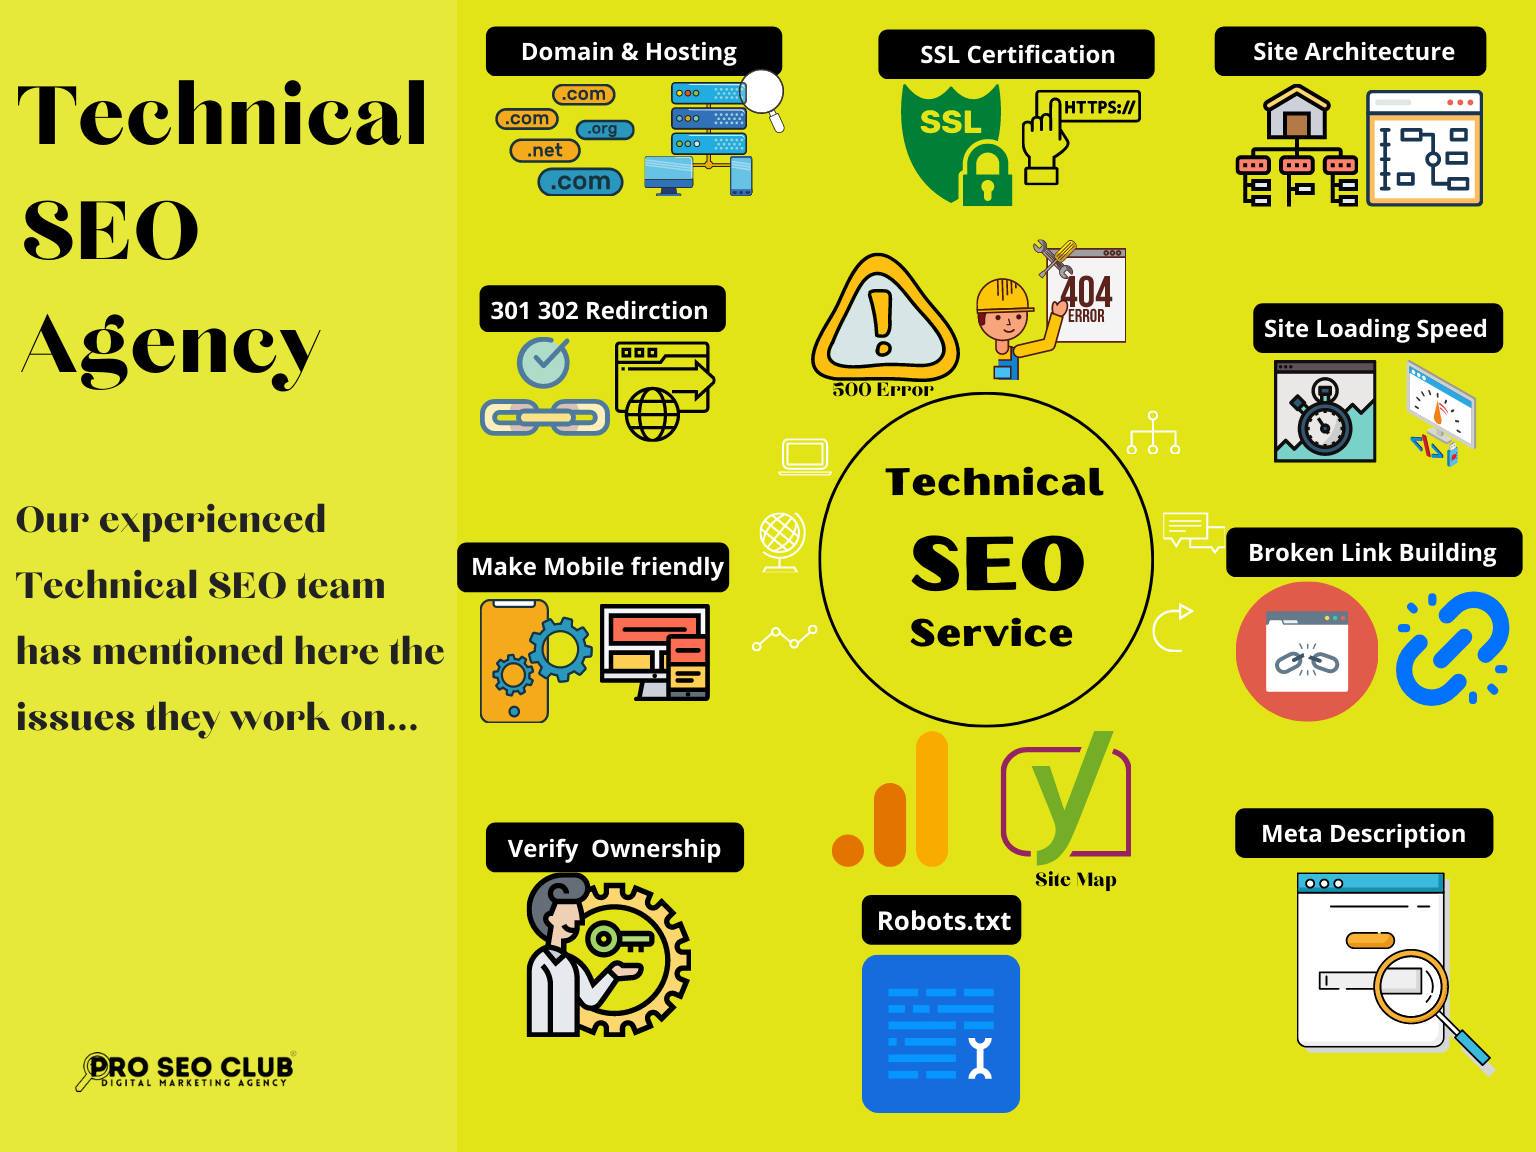 A diagram showing the different types of SEO strategies including OnPage SEO, OffPage SEO, Technical SEO, and Local SEO. The diagram lists the tasks included in technical SEO.